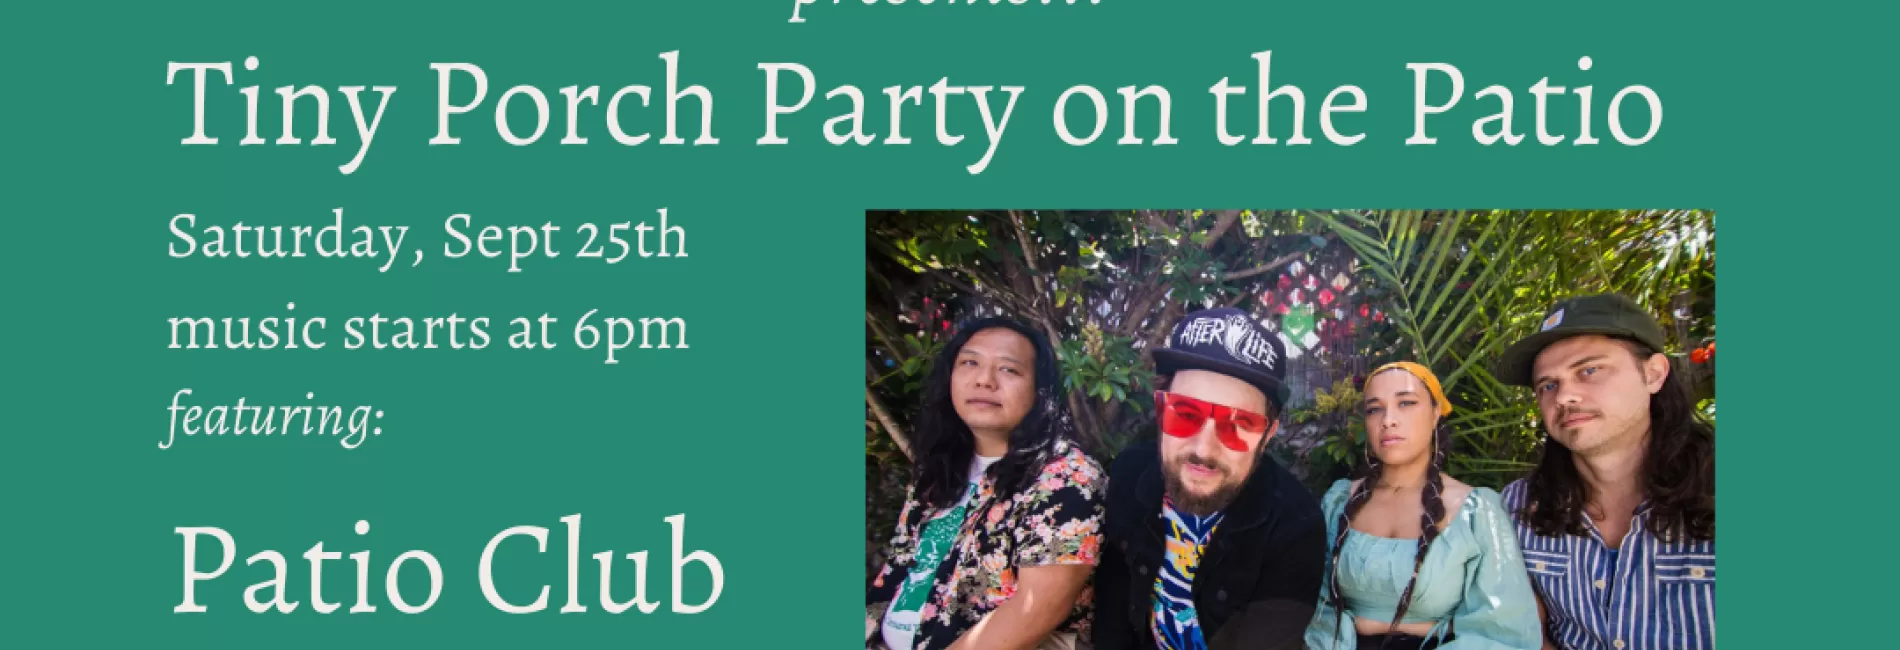 Tiny Porch Concert; Featuring Patio Club